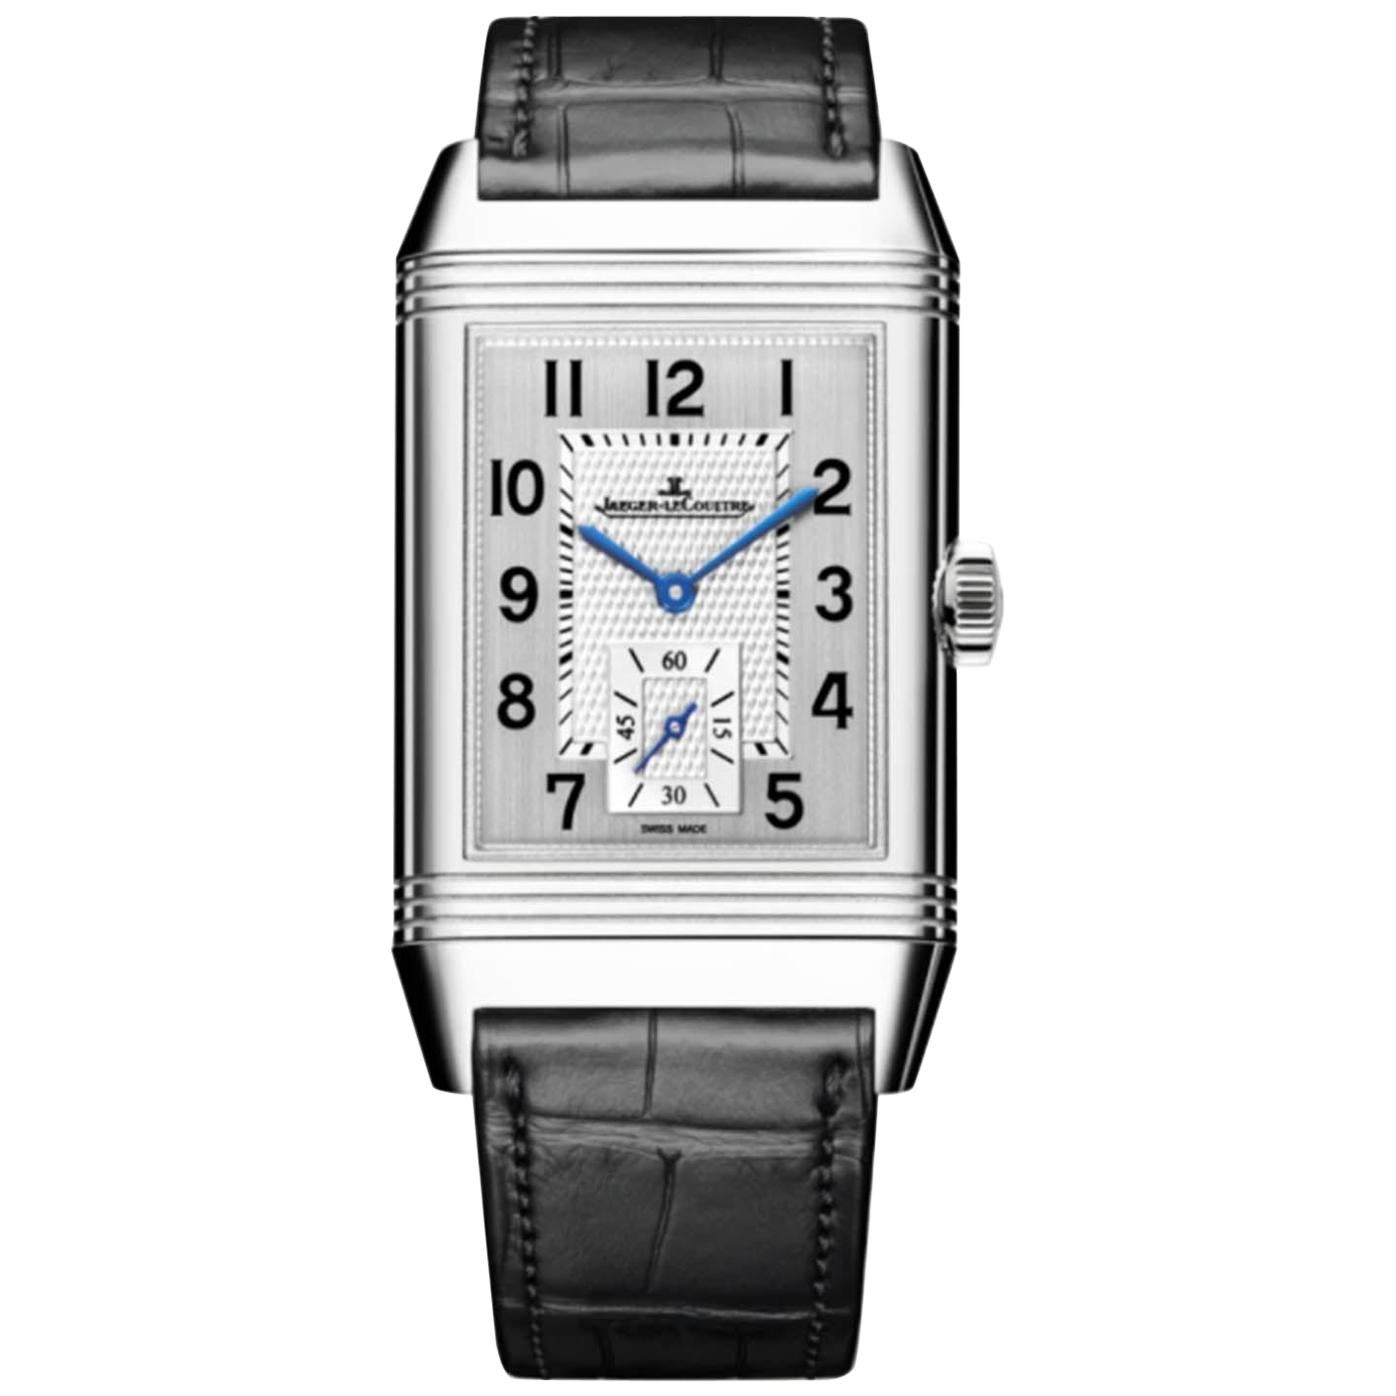 Jaeger-LeCoultre Reverso Classic Large Duoface Hand-Wound 28mm Watch rt. $9, 100